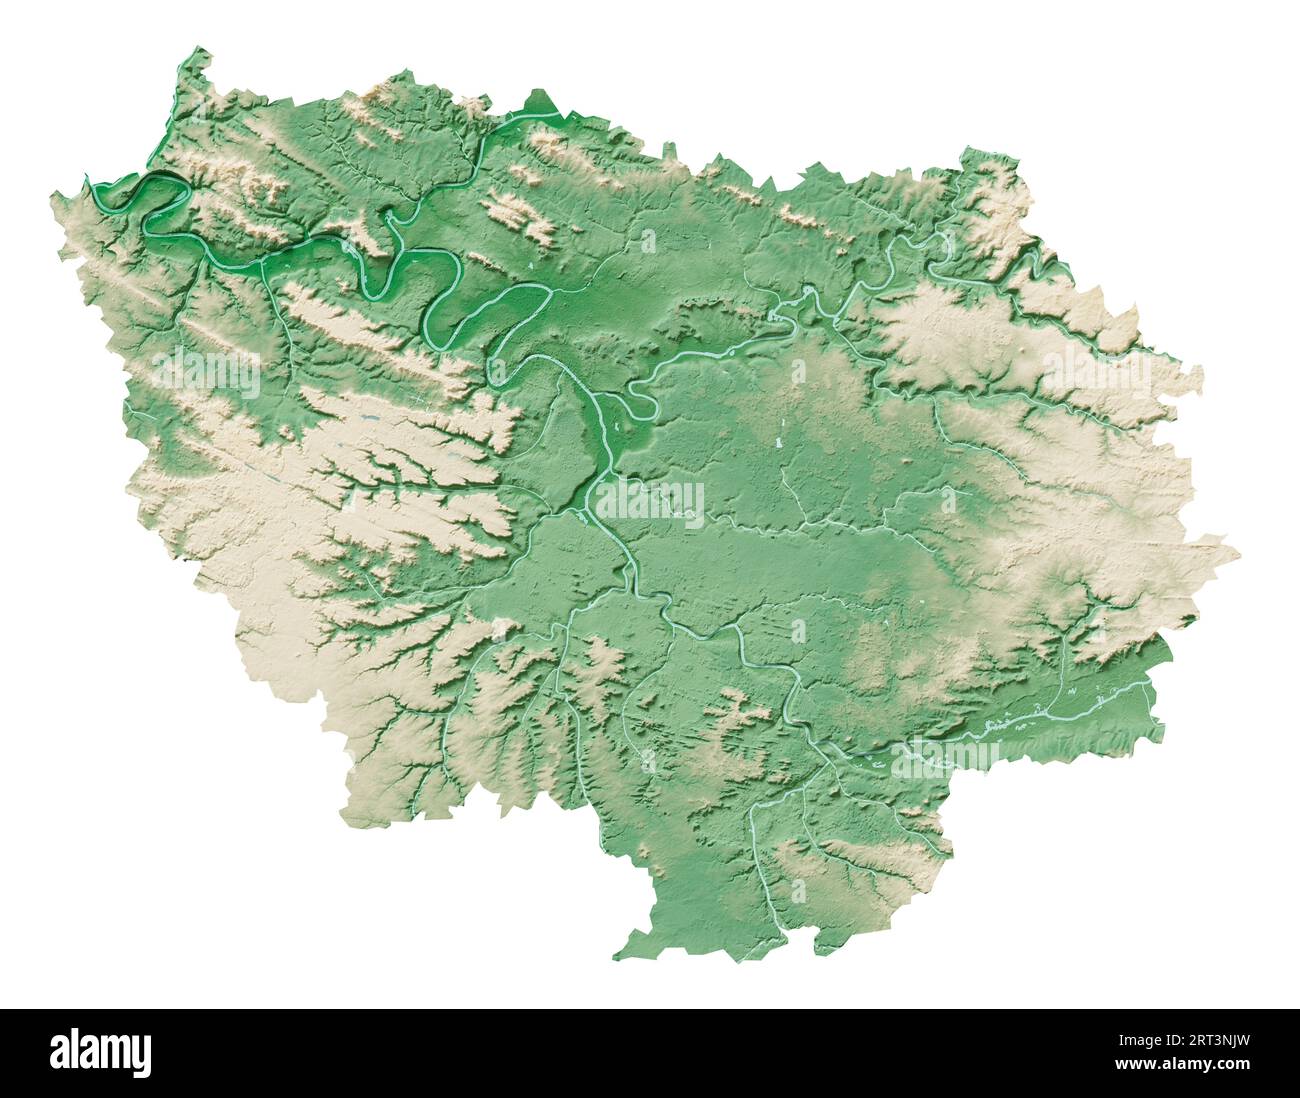 Île-de-France. A region of France. Detailed 3D rendering of a shaded relief map, rivers, lakes. Colored by elevation. Pure white background. Stock Photo